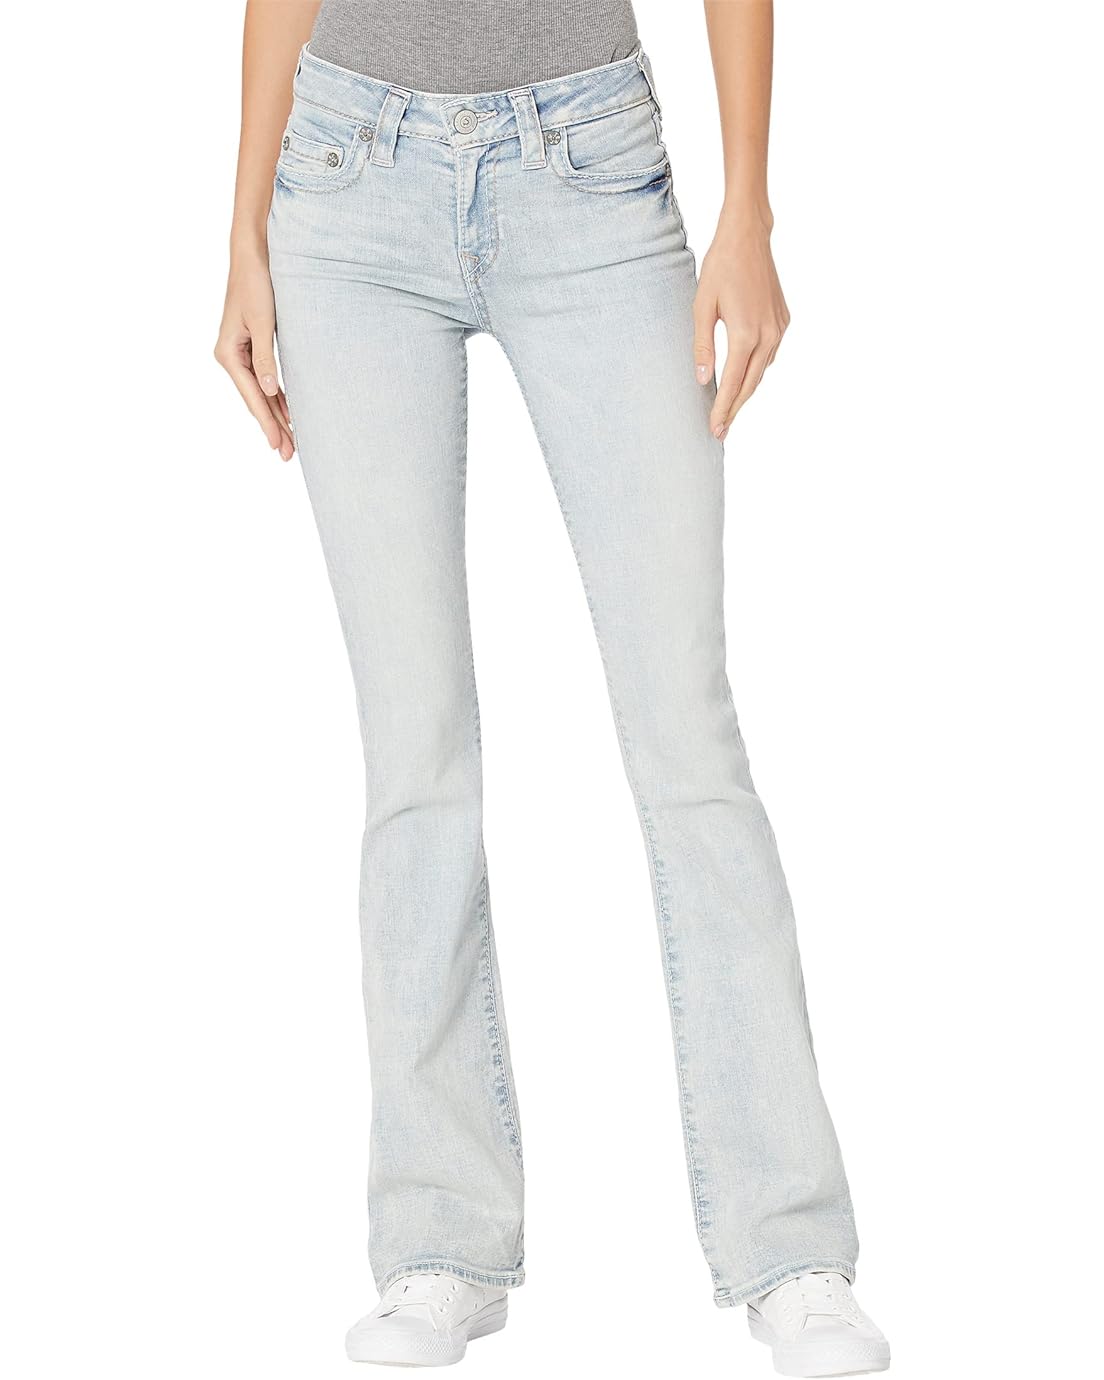 True Religion Becca Mid-Rise Bootcut Big T in Renovation